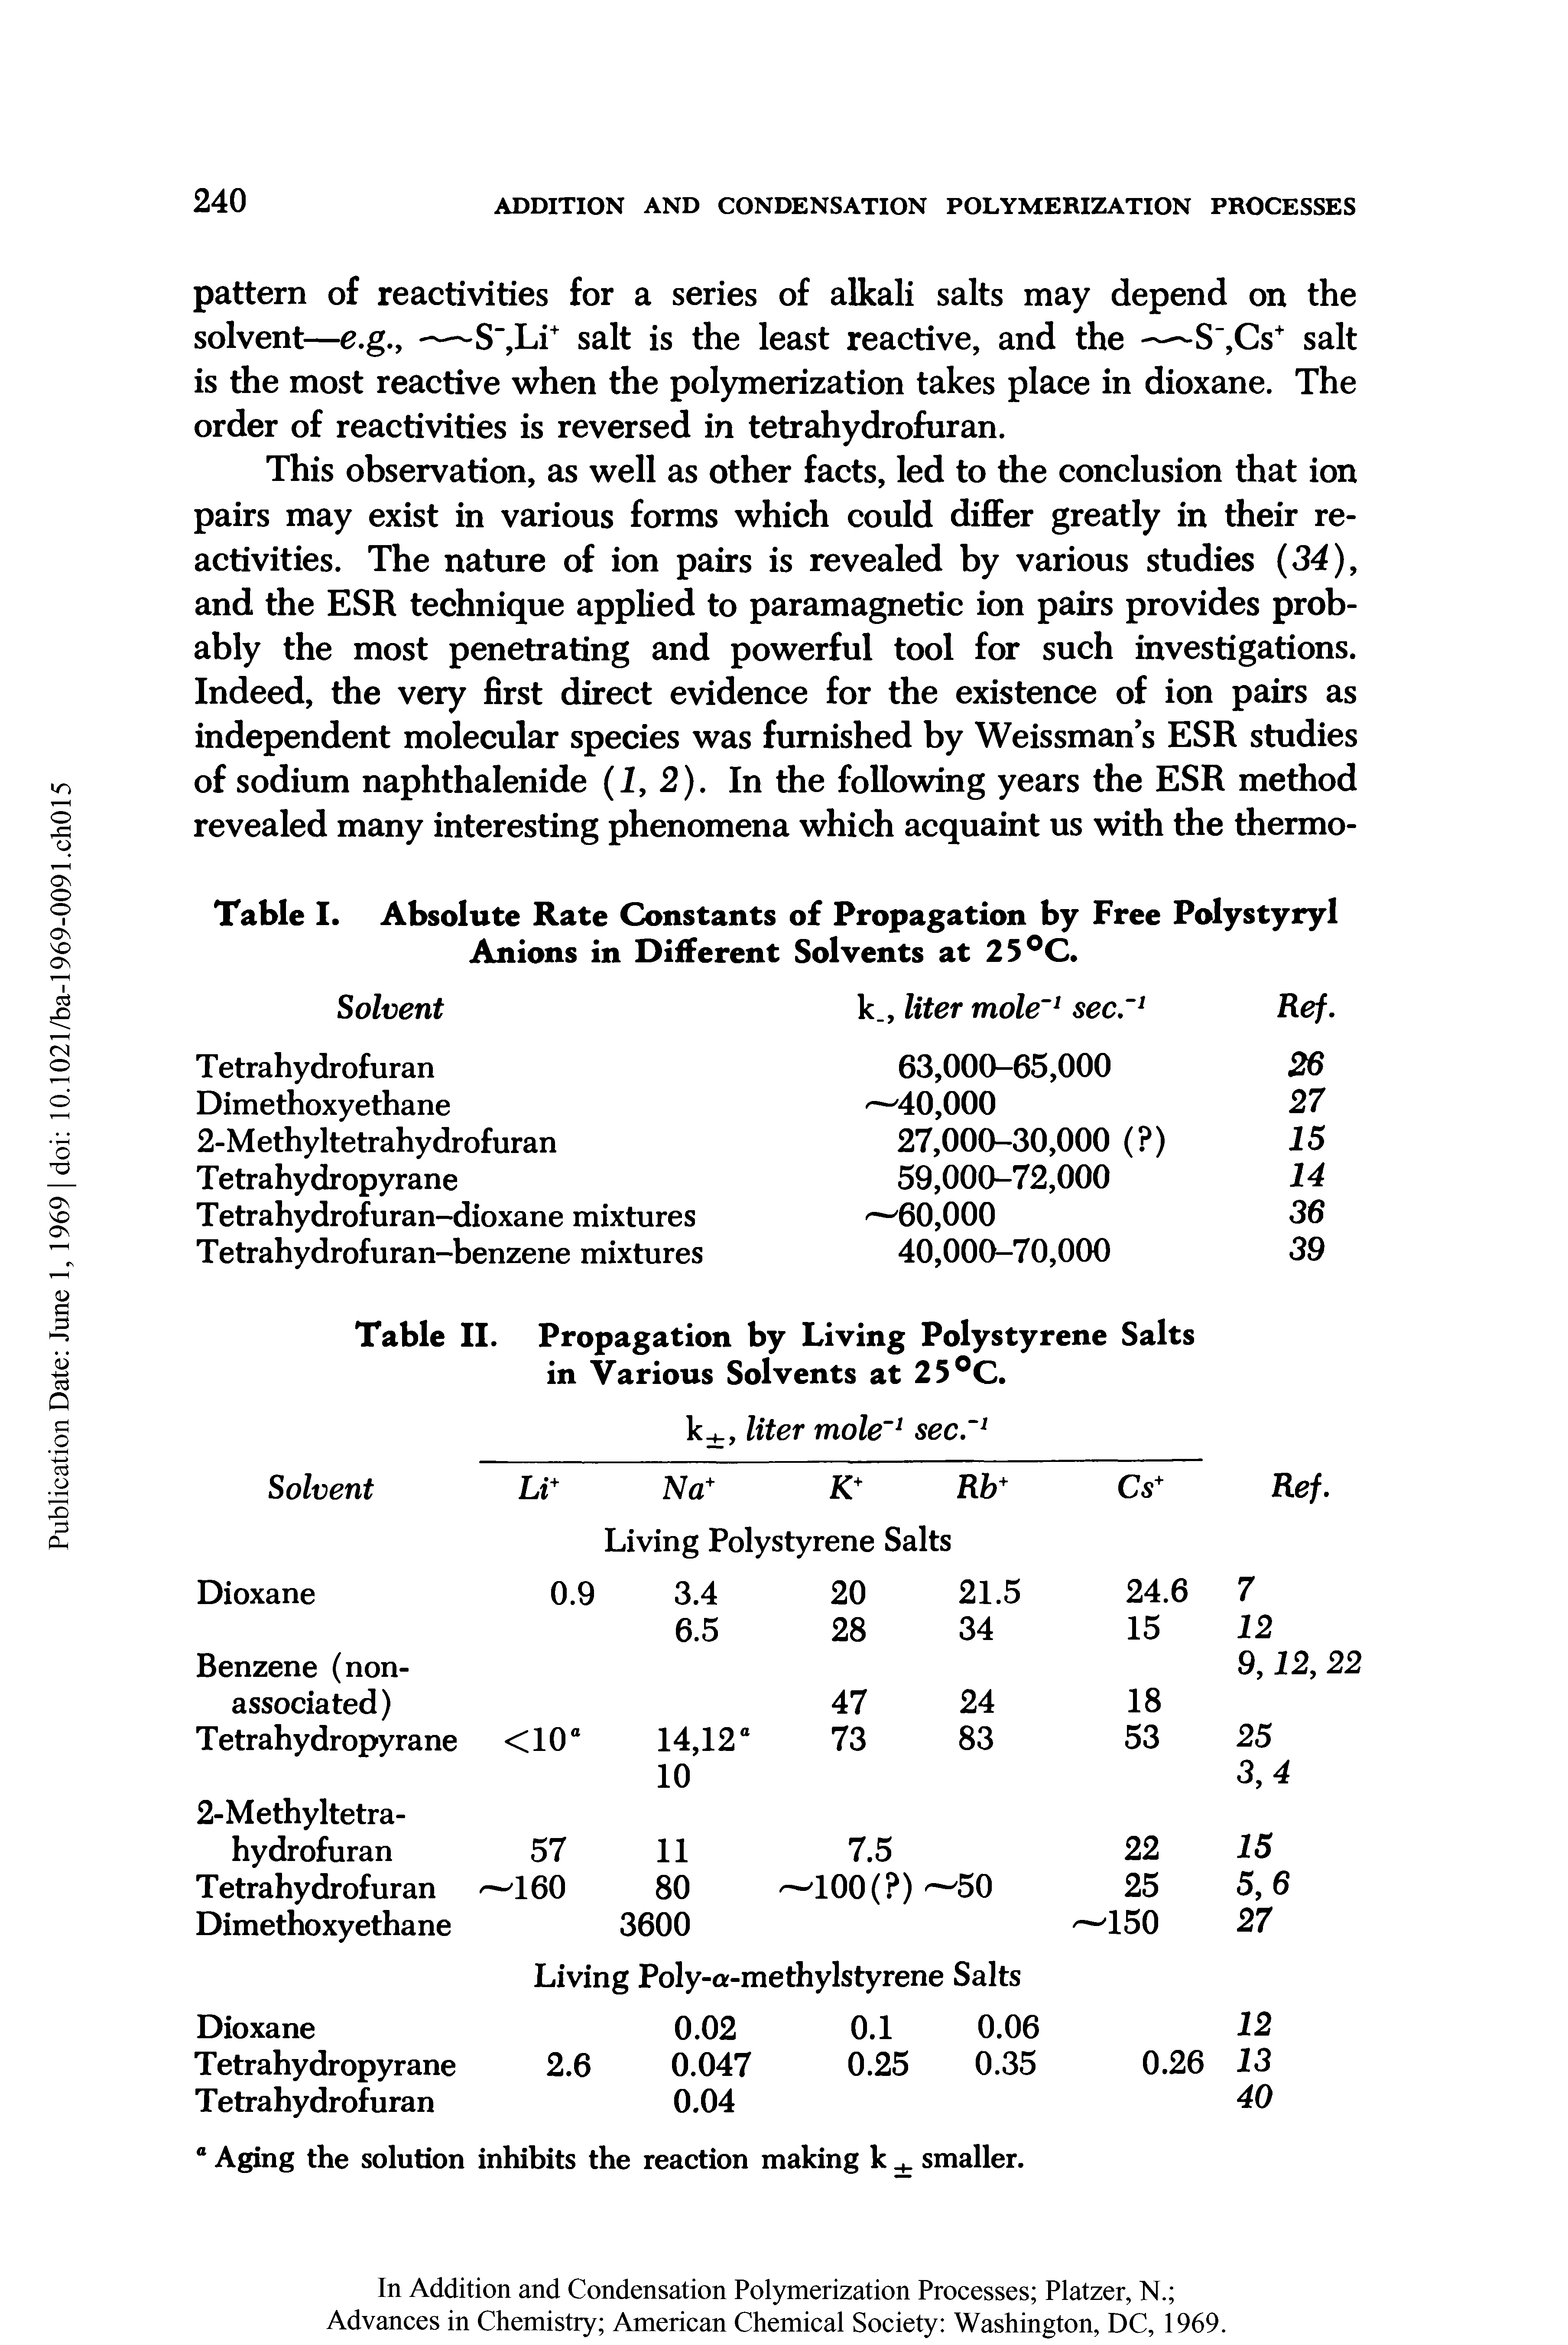 Table II. Propagation by Living Polystyrene Salts in Various Solvents at 25°C.